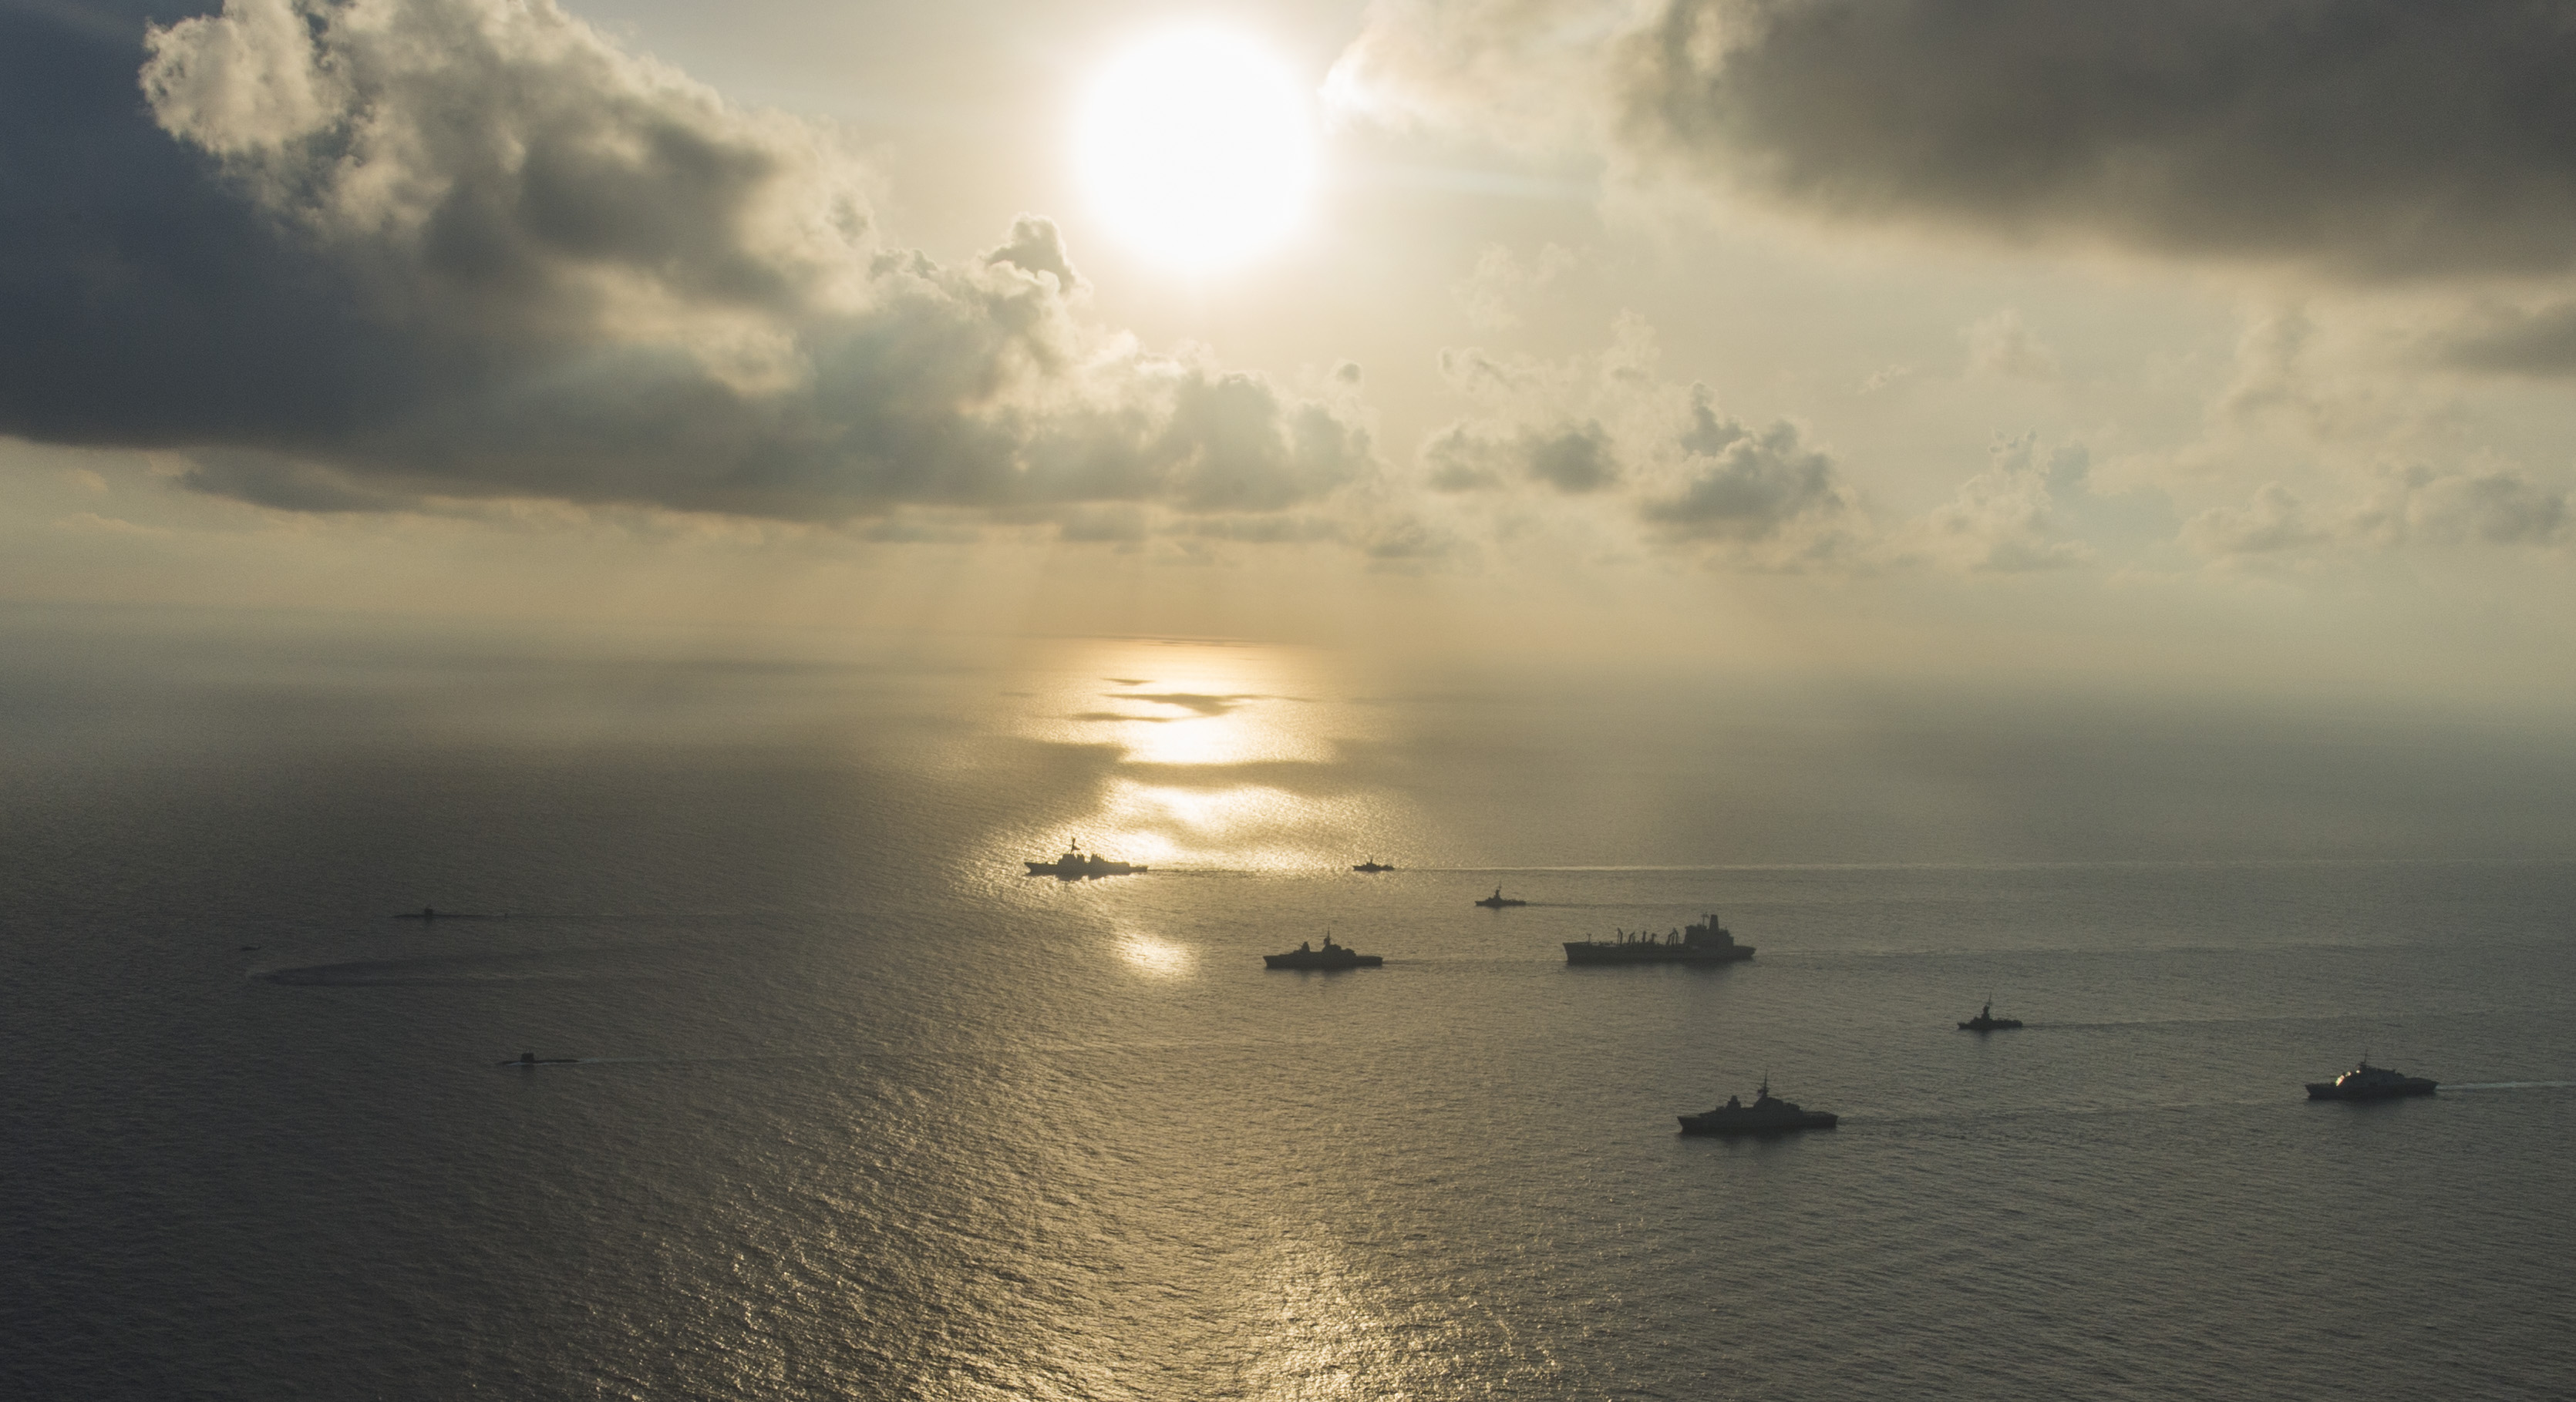 Ships and submarines from the Republic of Singapore navy and U.S. Navy gather in formation during the underway phase of Cooperation Afloat Readiness and Training (CARAT) Singapore 2015 on July 21, 2015. US Navy Photo